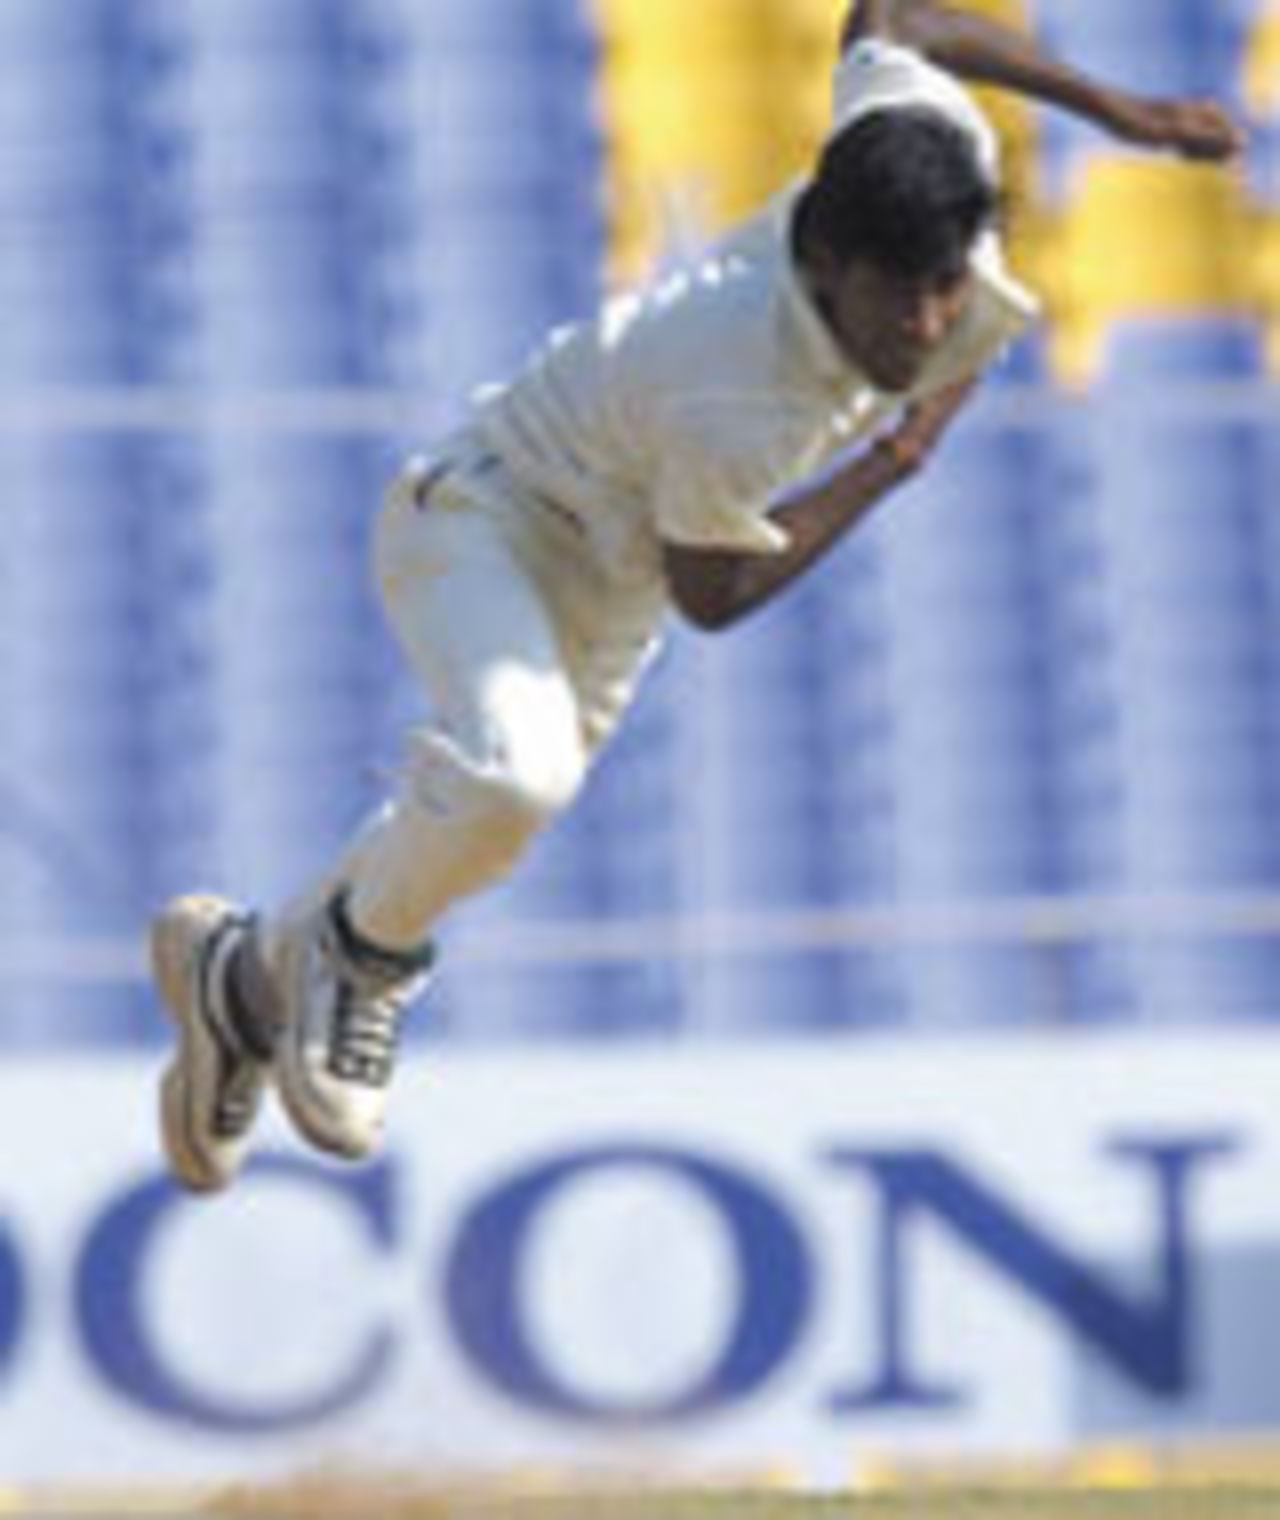 L Balaji in action in his debut Test, India v New Zealand, 1st Test, Ahmedabad, 2nd Day, October 10, 2003